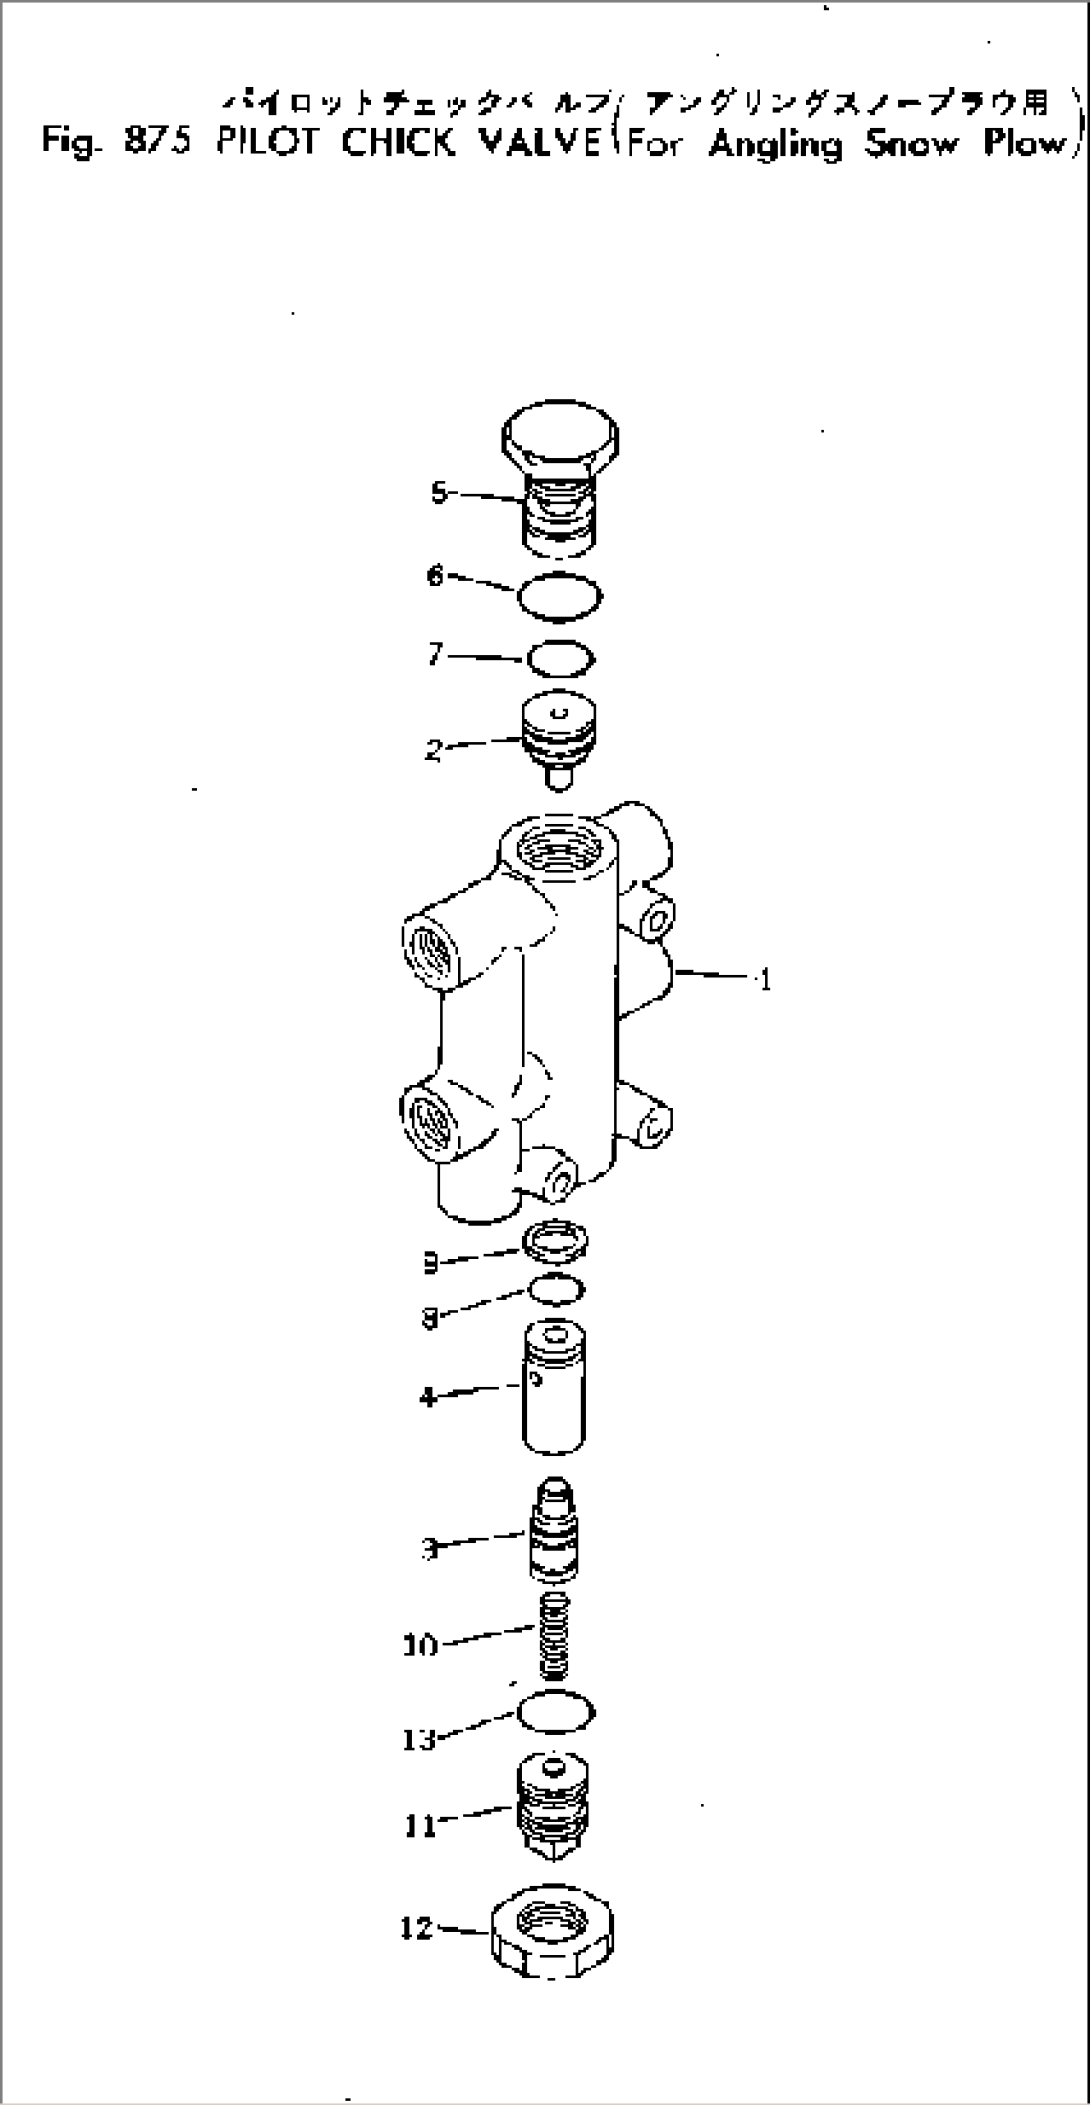 PILOT CHECK VALVE (FOR ANGLING SNOW PLOW)